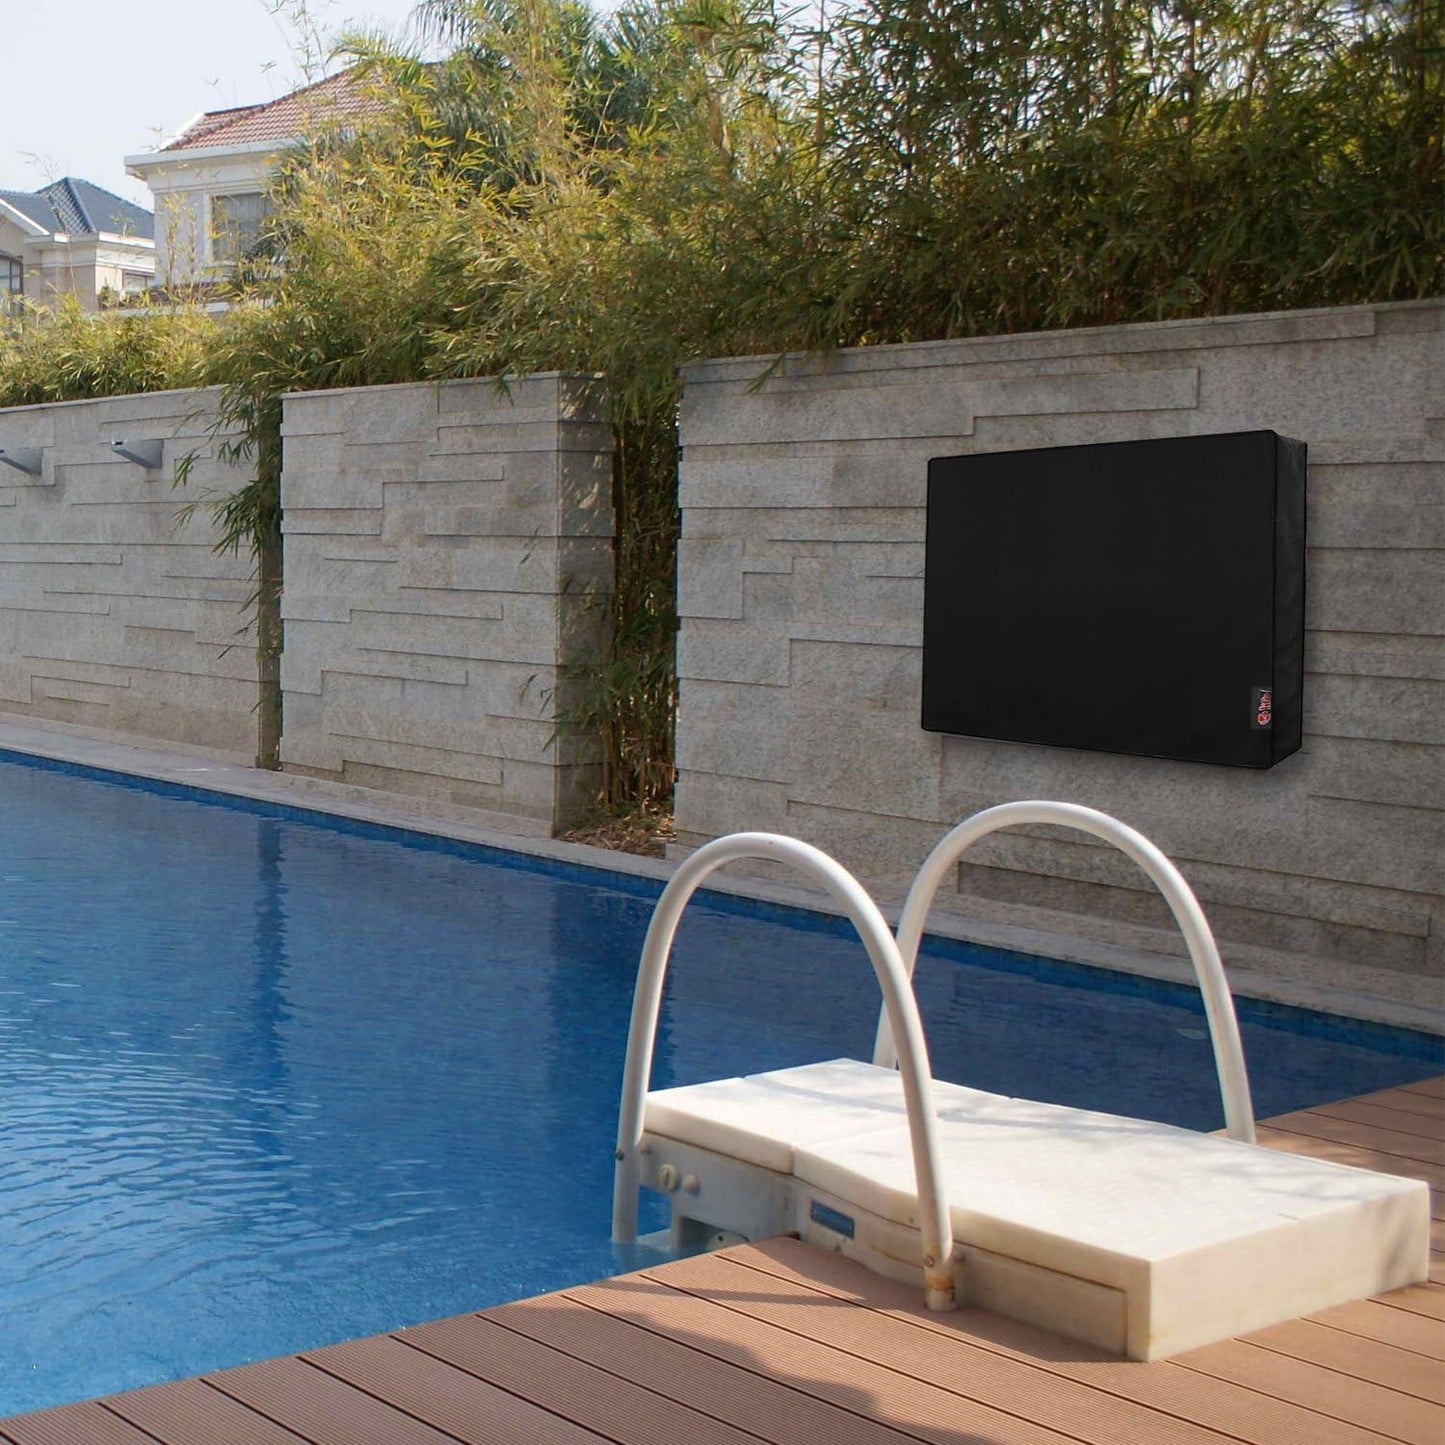 Outdoor TV Cover 55 to 58 inches, Waterproof and Weatherproof, Fits Up to 55''W x 35''H for Outside Flat Screen TV